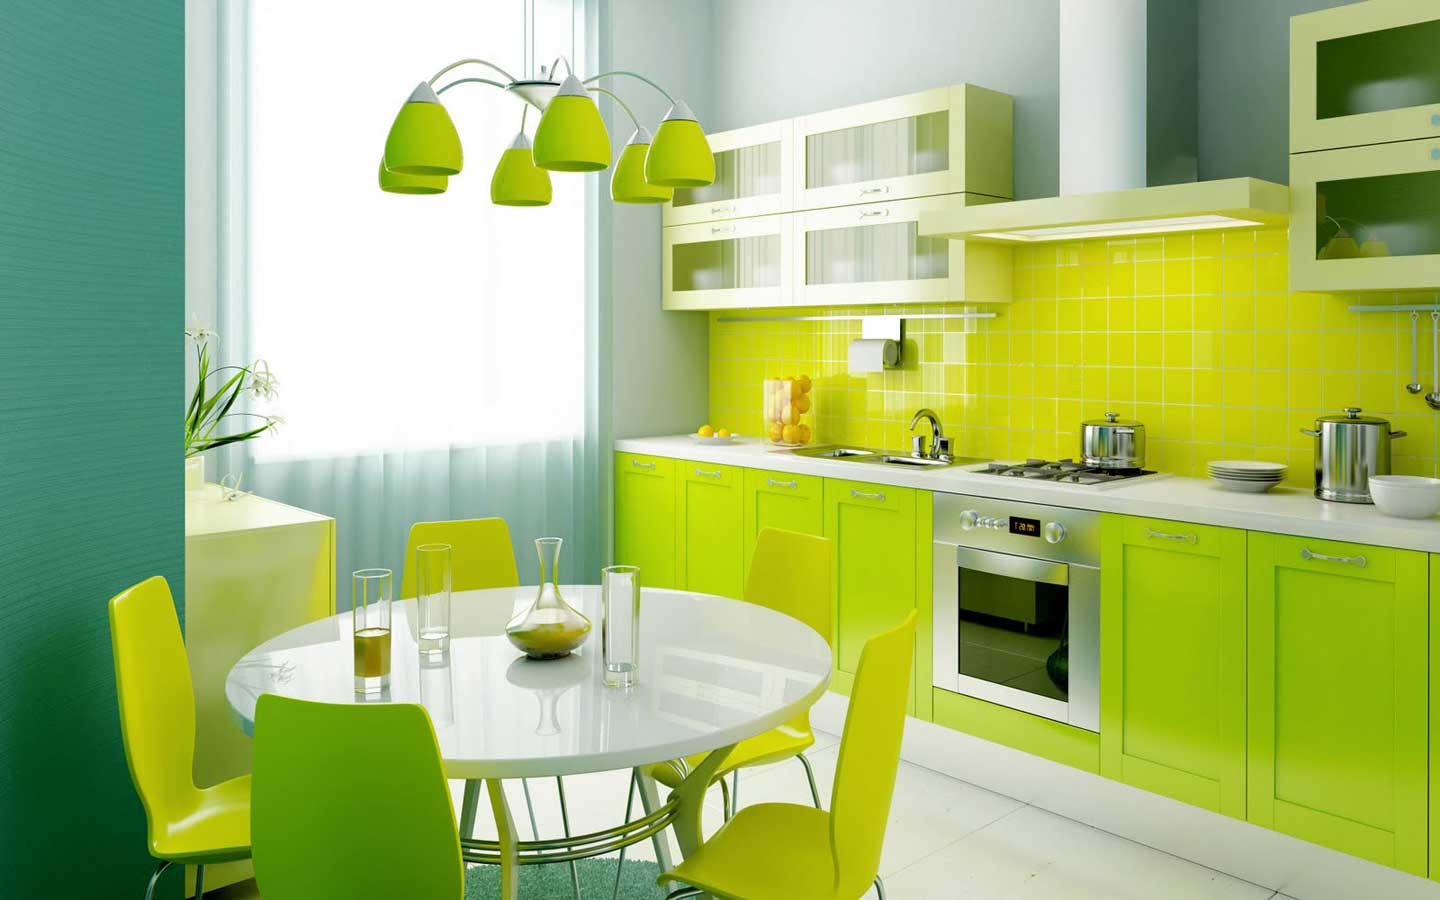 Green Kitchen For Fresh Green Kitchen Remodel Ideas For Small House Design With Natural Green Kitchen Cabinet Idea And Modern Gas Stove Design Also Interesting Stainless Steel Wash Basin Idea Kitchen Most Popular Kitchen Layout To Emulate Your Own After